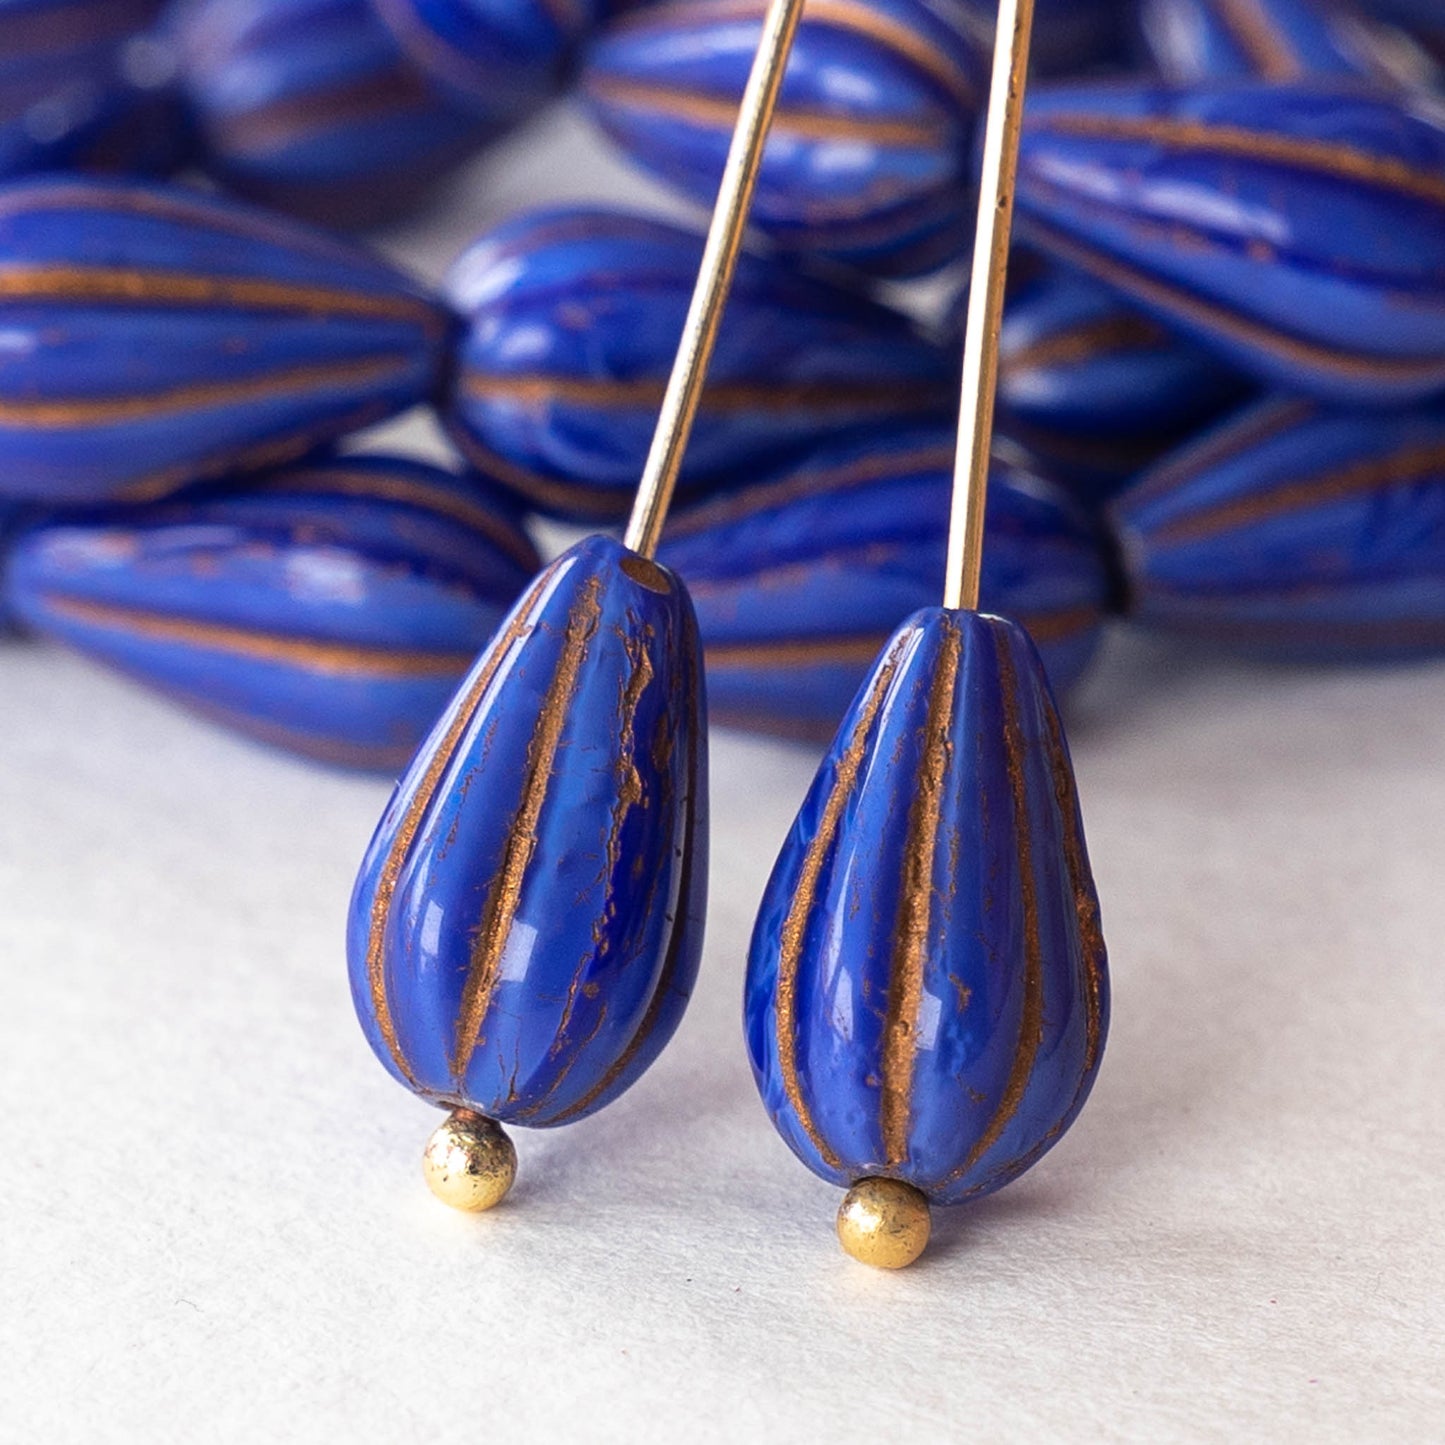 8x13mm Melon Drop - Blue Silk With Gold Wash - 10 Beads